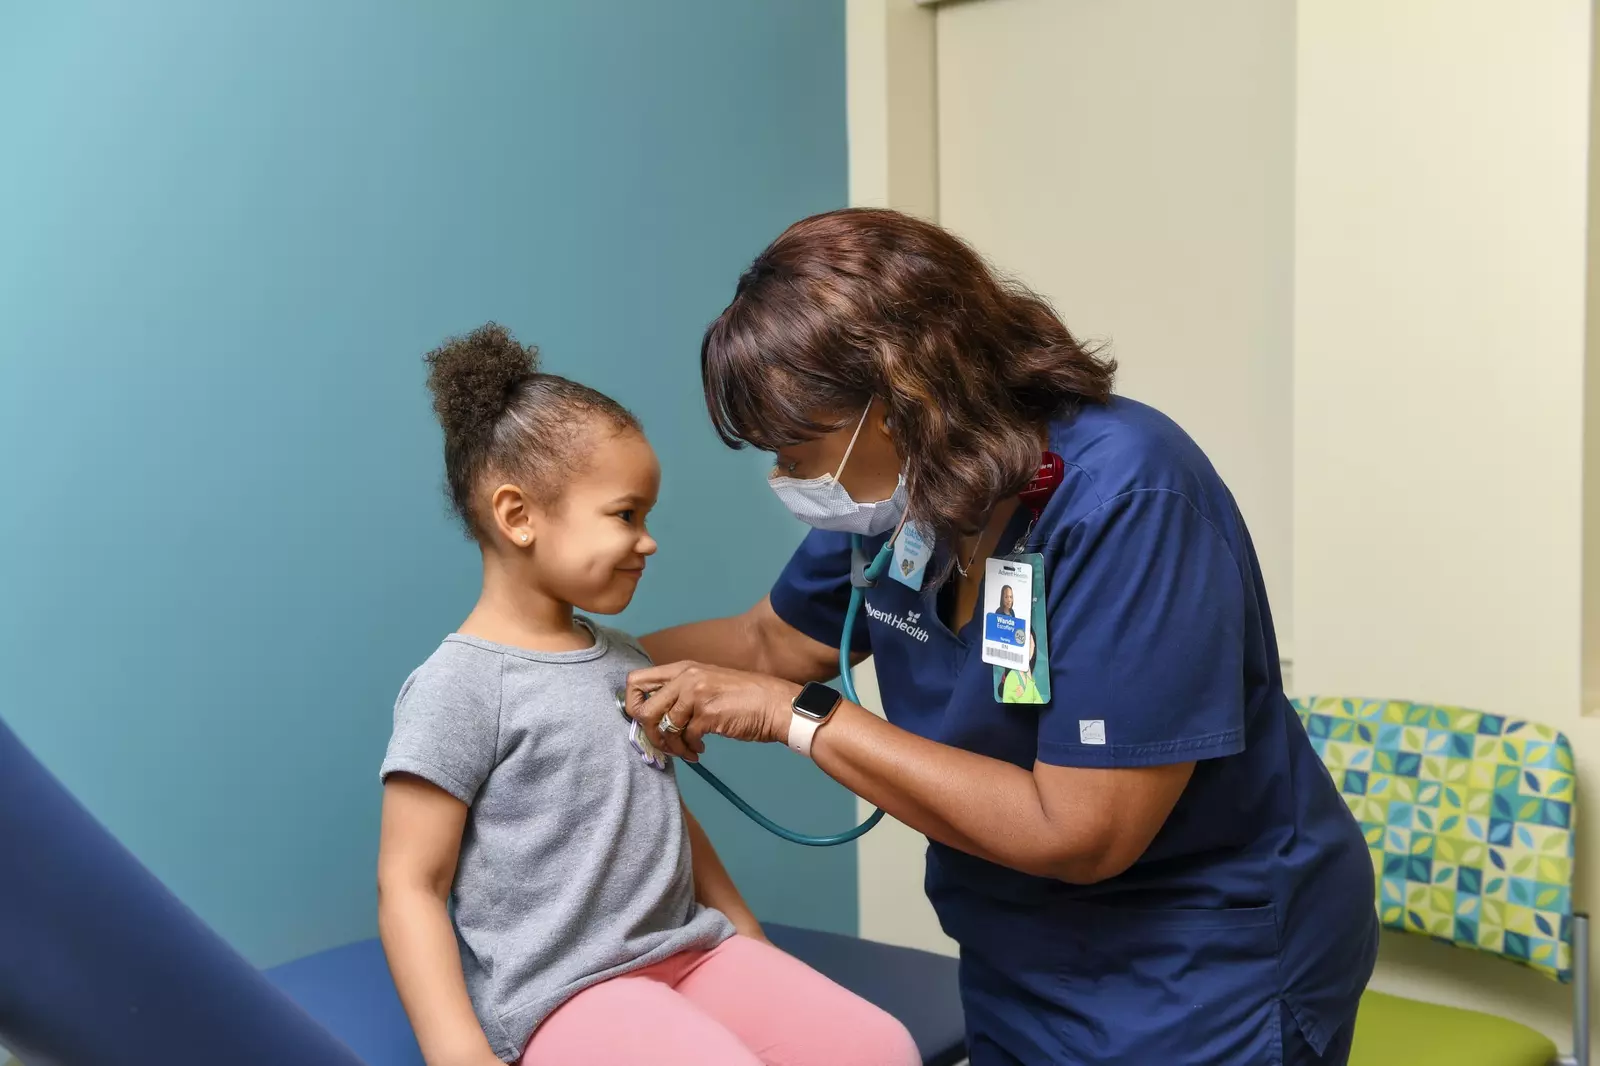 Onsite screenings provided to all enrolled children by AdventHealth team members.